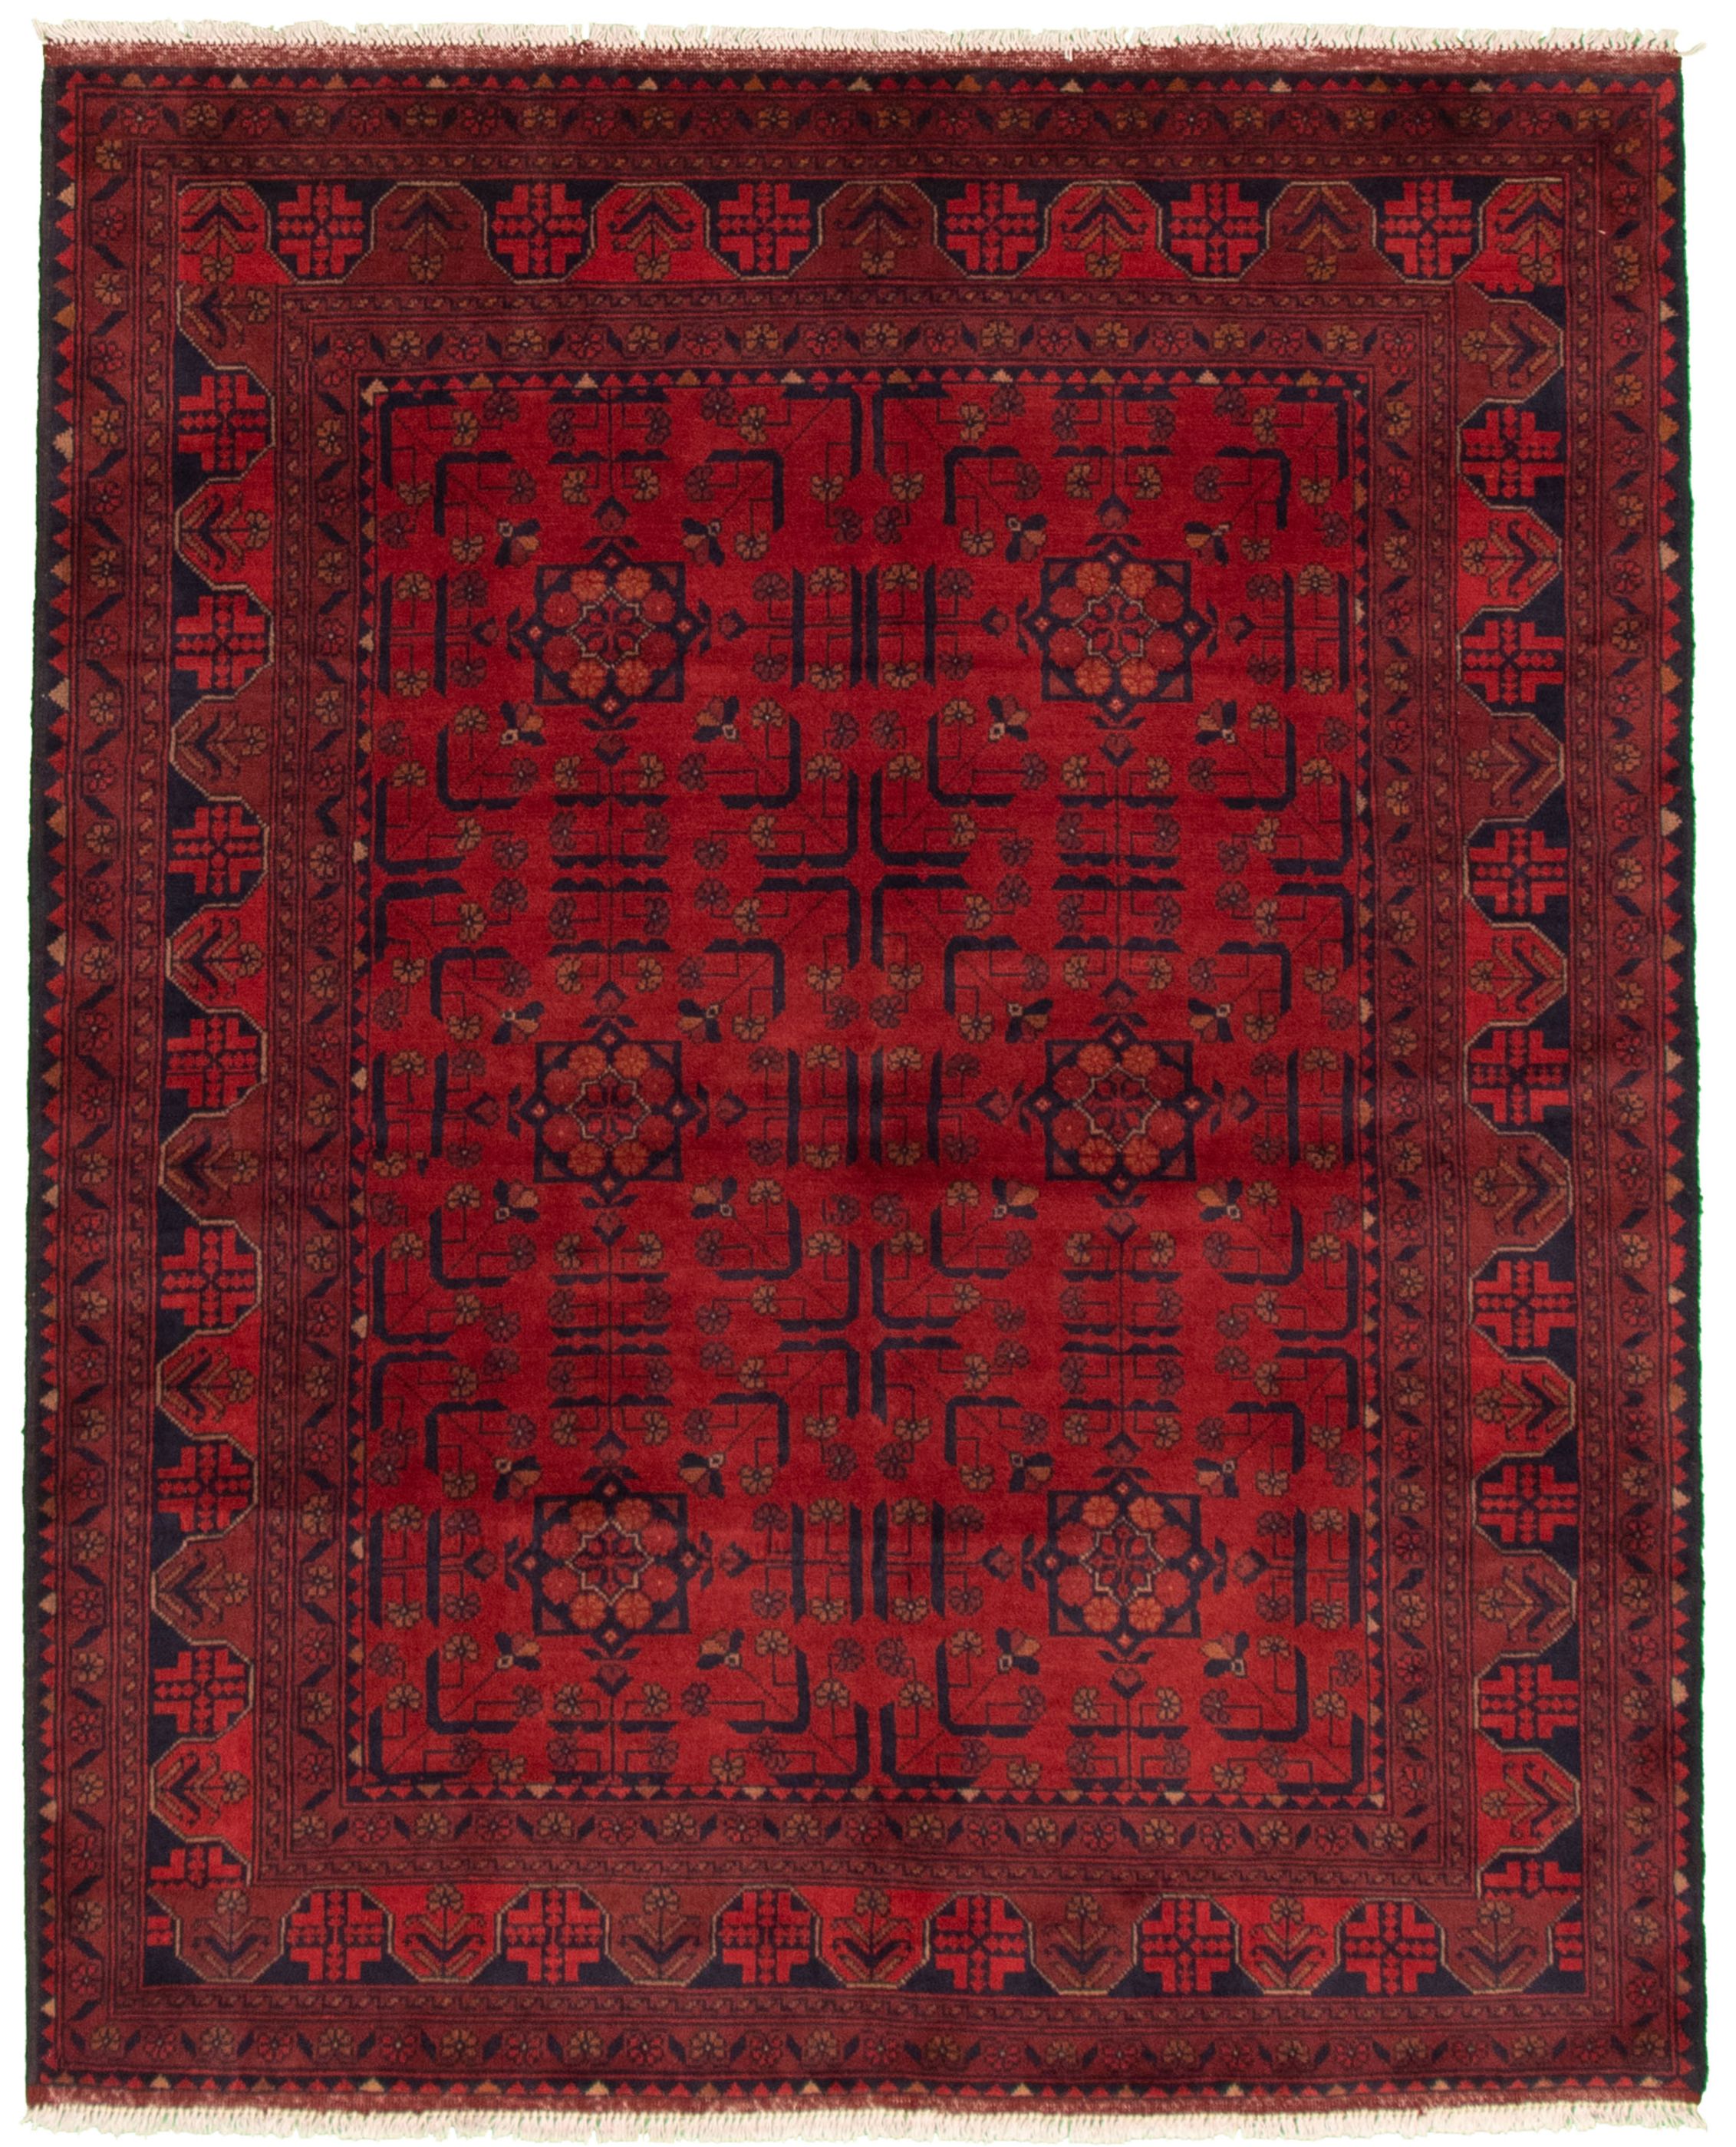 Hand-knotted Finest Khal Mohammadi Red Wool Rug 5'0" x 6'4"  Size: 5'0" x 6'4"  